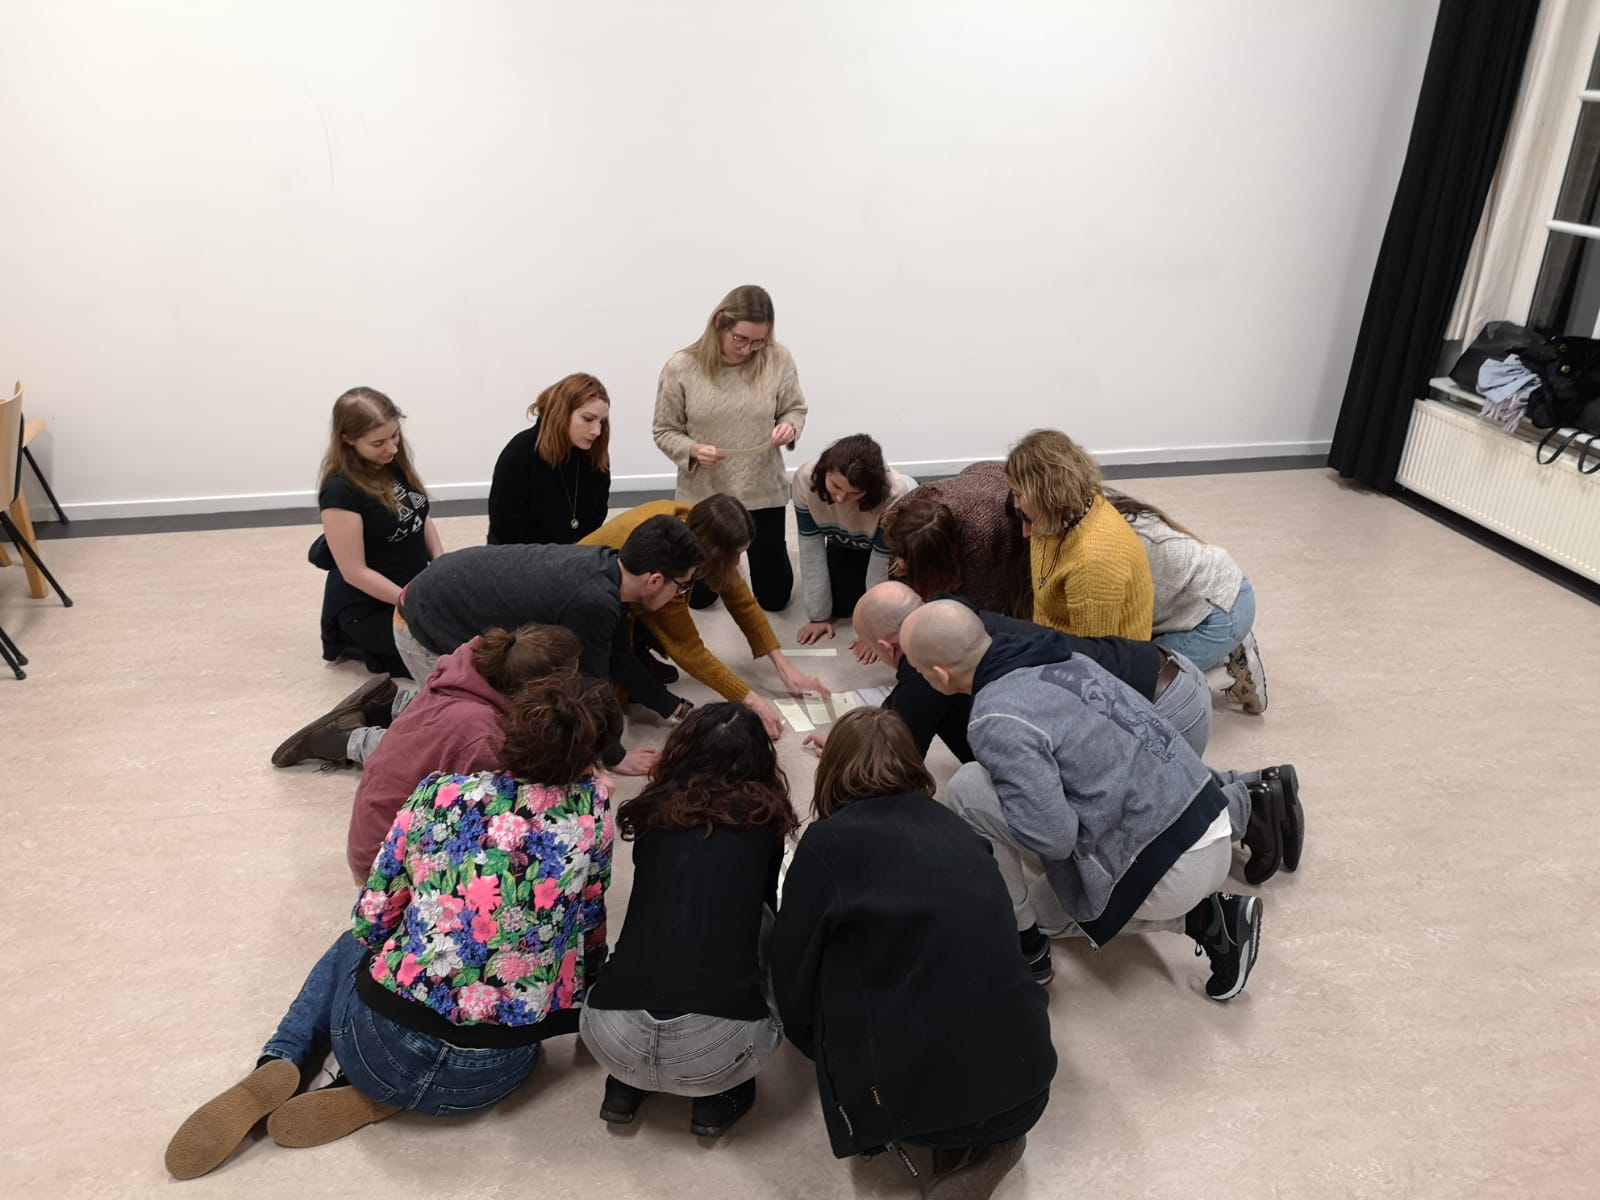 Acting Class Act Attack. A group of people form a circle, sitting on the floor, looking at some notes they have laying on the ground